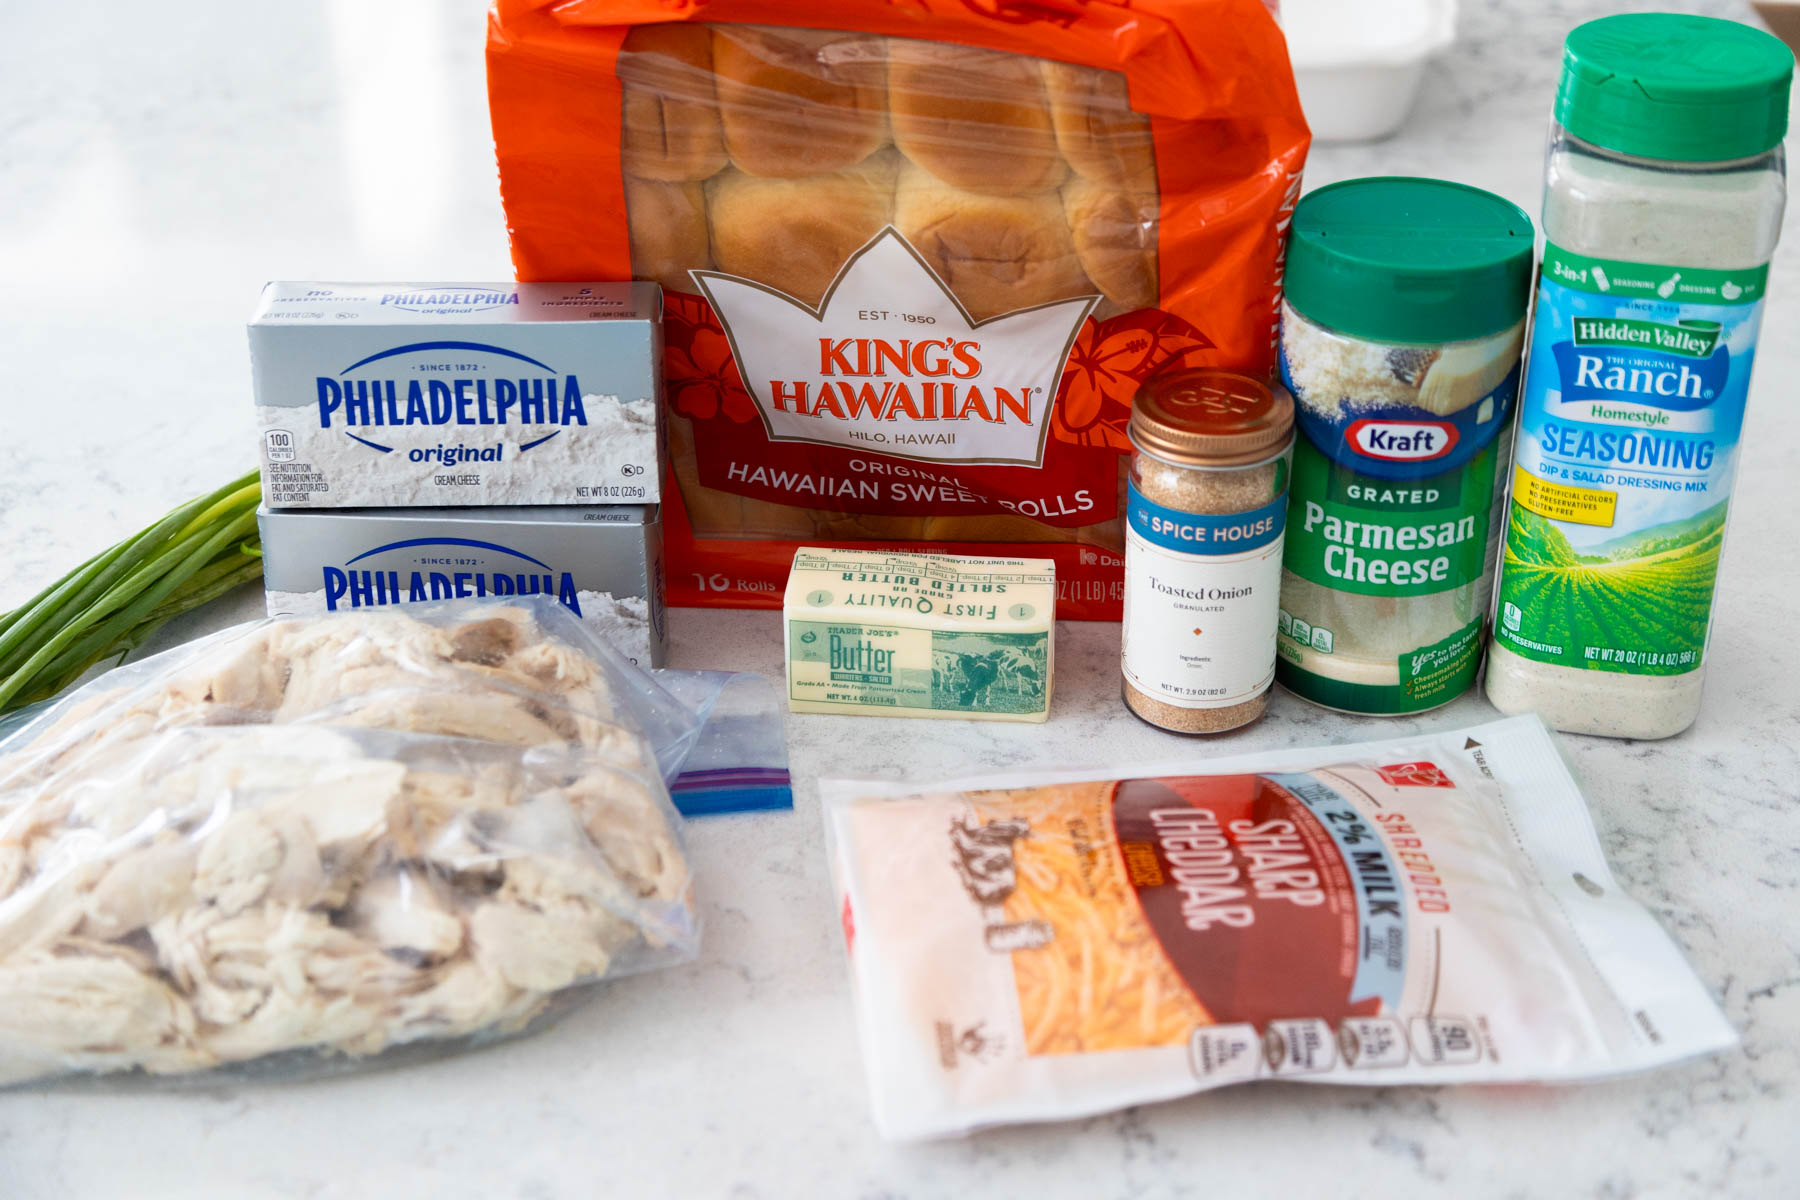 The ingredients to make the crack chicken sliders are on the counter.